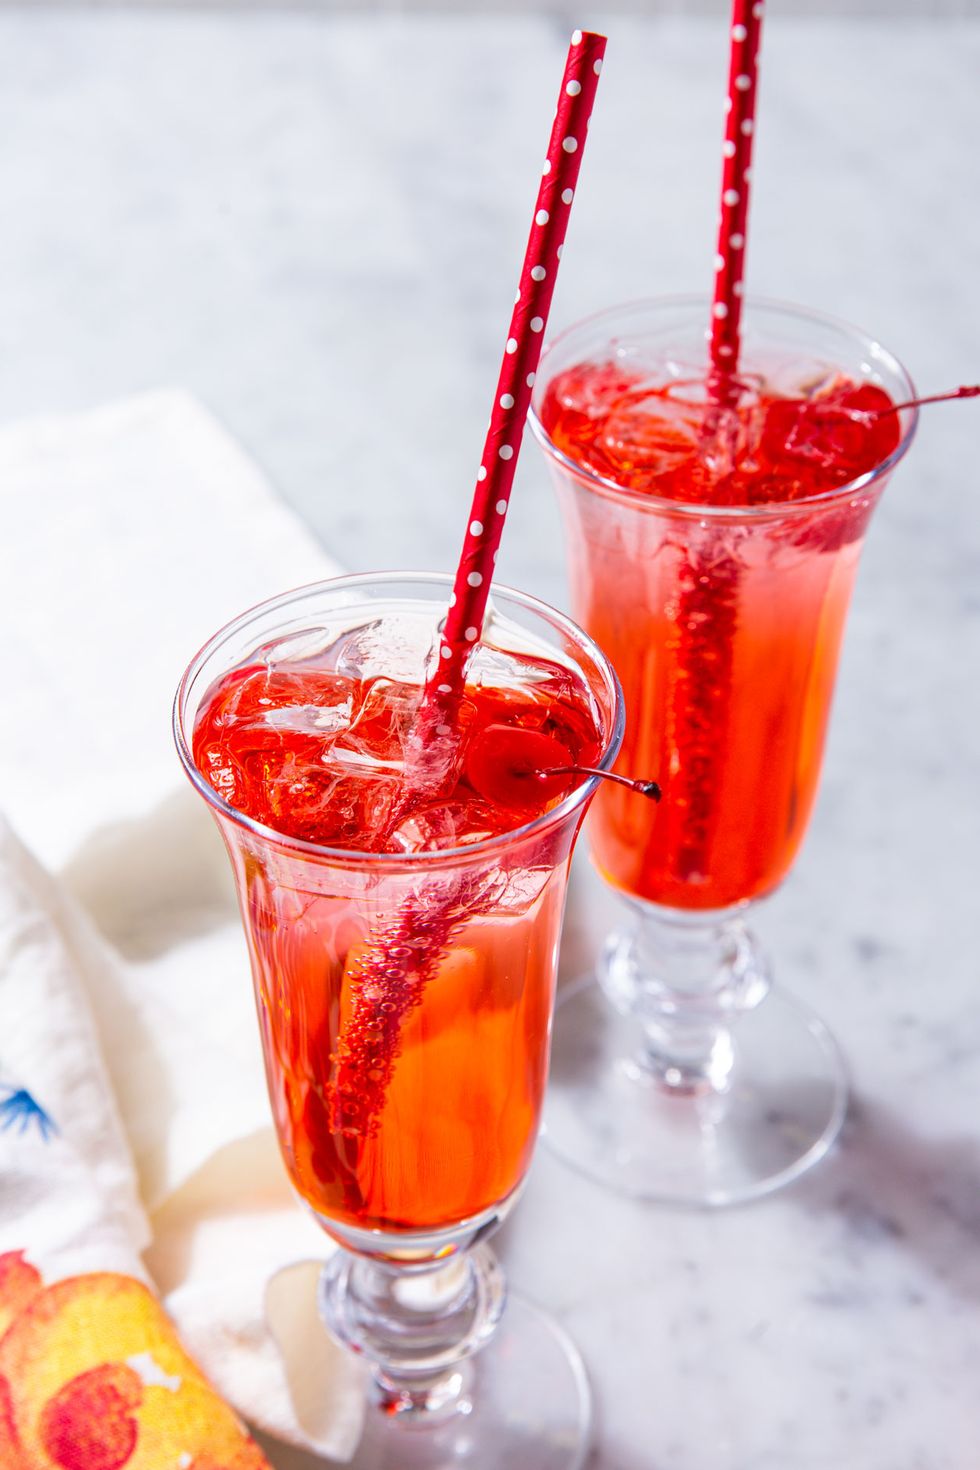 https://hips.hearstapps.com/hmg-prod/images/20191115-shirley-temple-delish-ehg-4460-1585335880.jpg?crop=0.9334315892901007xw:1xh;center,top&resize=980:*